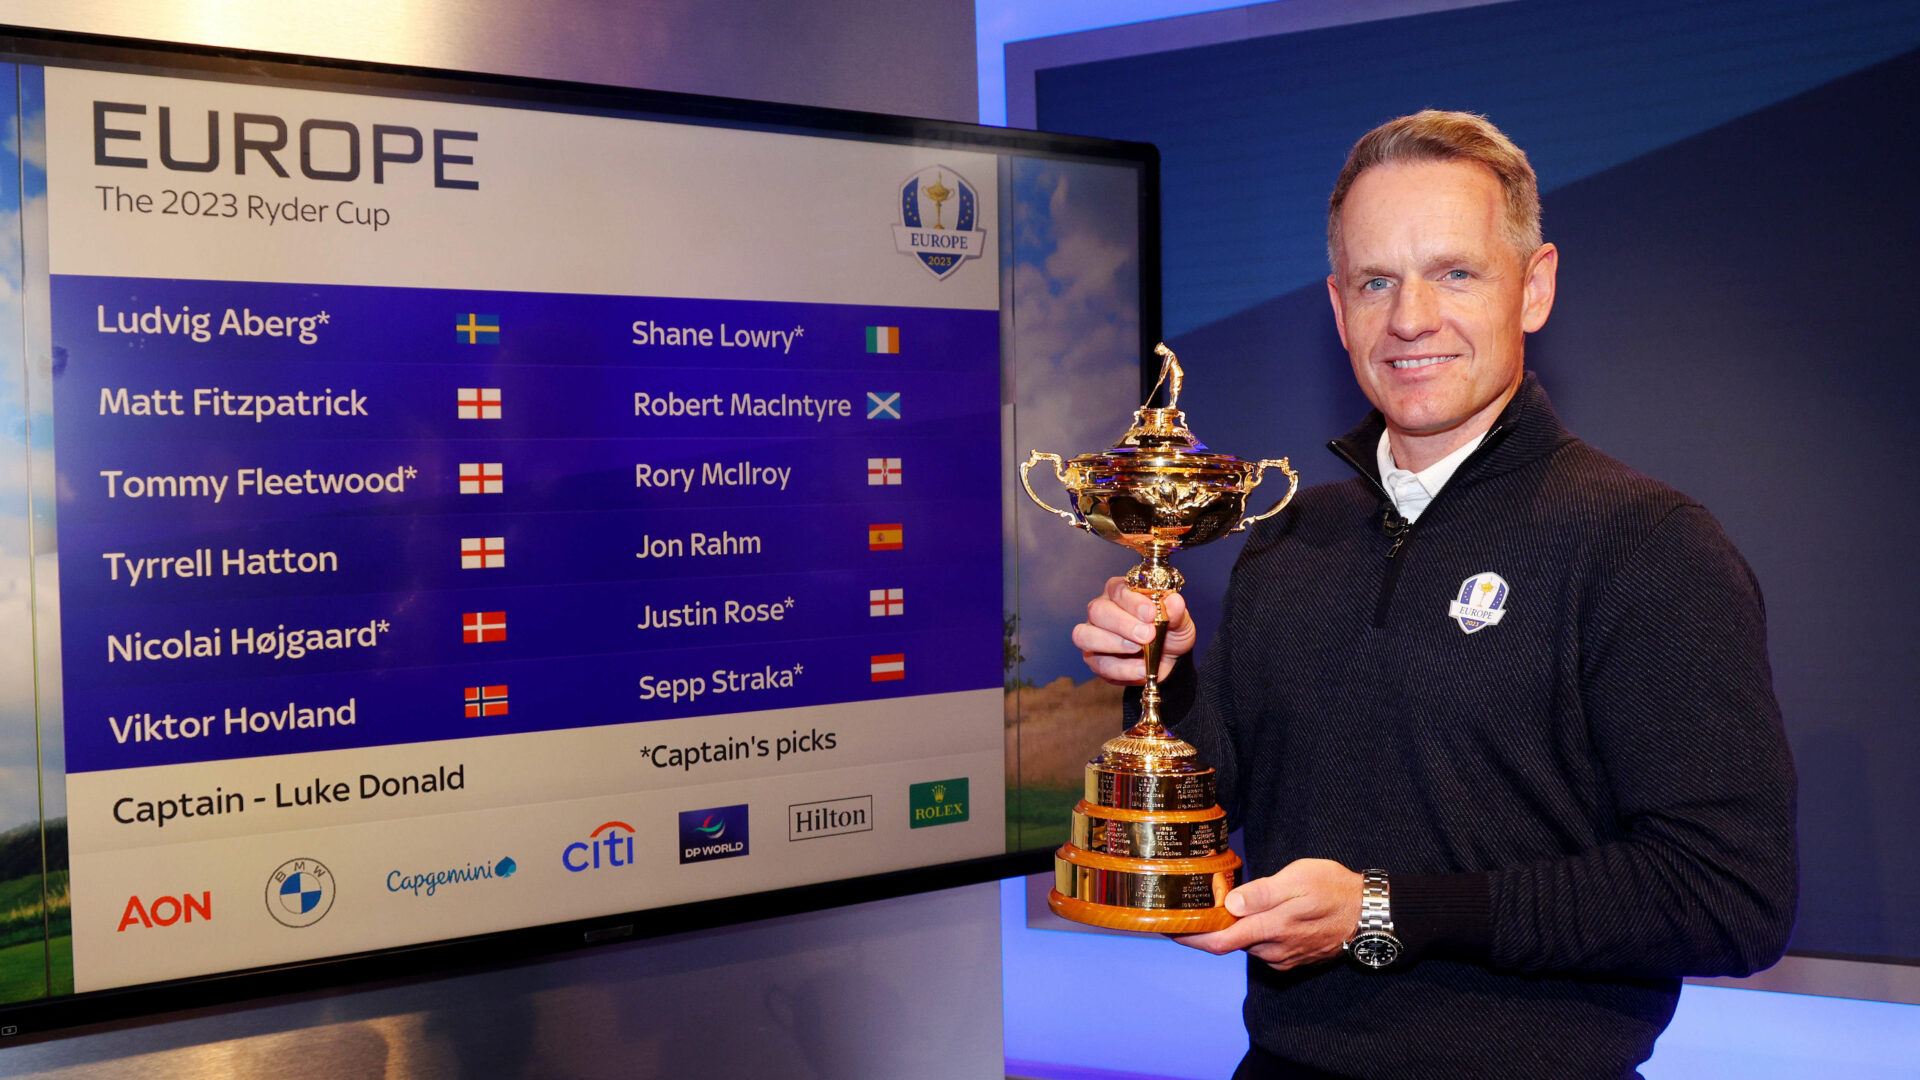 ISLEWORTH, ENGLAND - SEPTEMBER 04: Luke Donald, Captain of Team Europe poses for a photo during the Luke Donald Ryder Cup Wildcard Announcement at Sky Sports Studios on September 04, 2023 in Isleworth, England. (Photo by Andrew Redington/Getty Images)